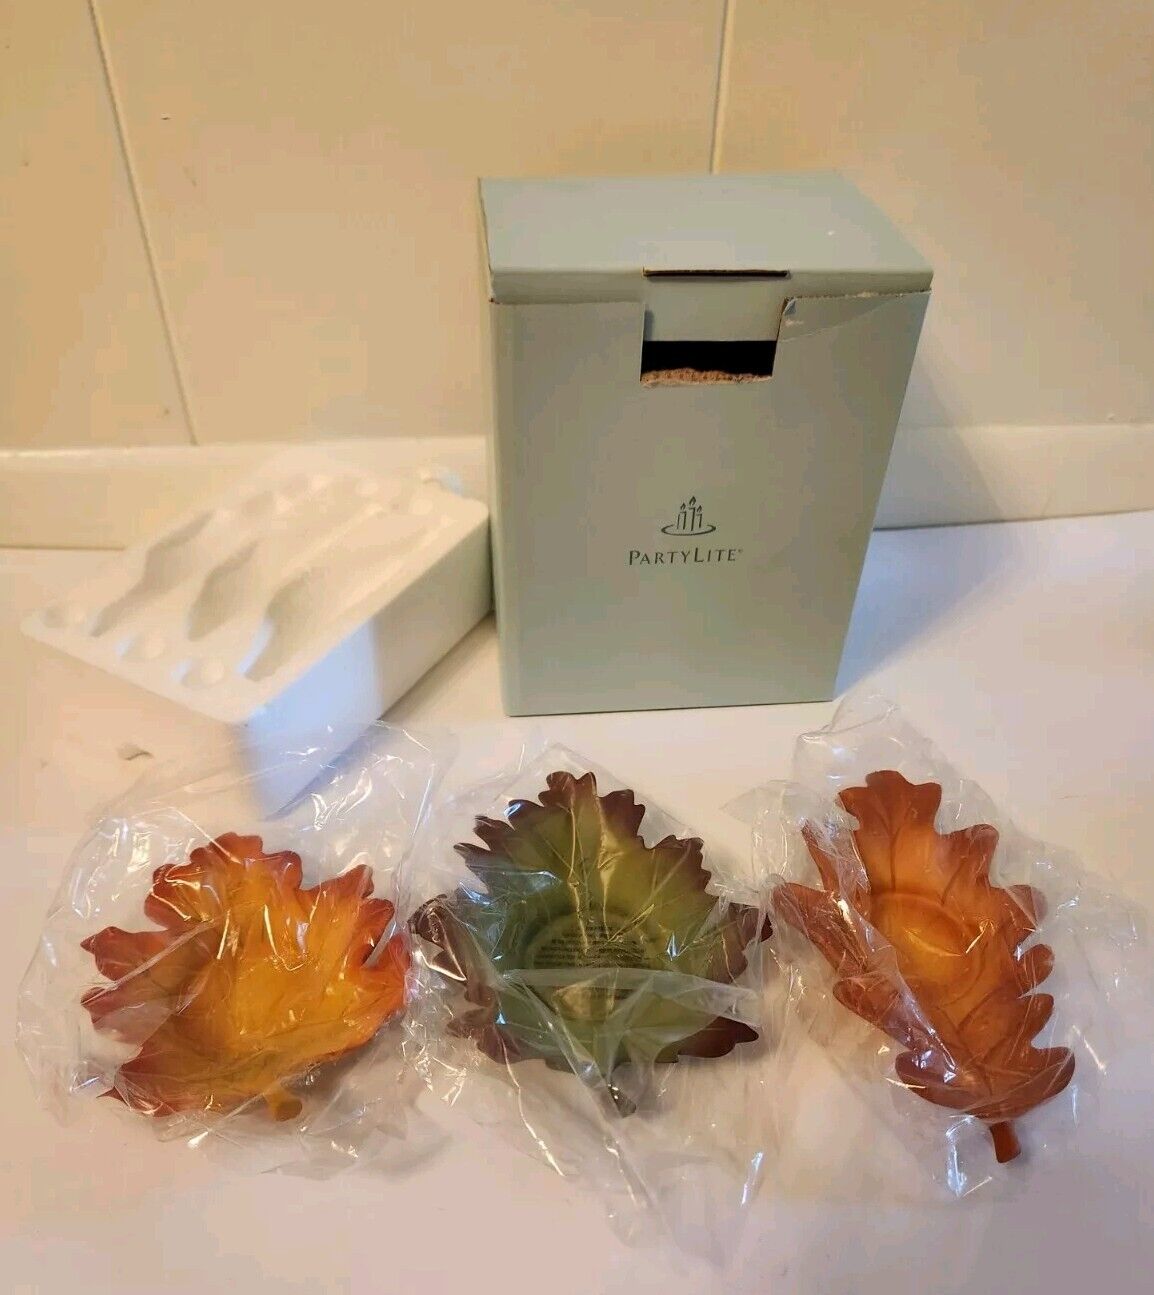 Partylite Whispering Leaves Tealight Trio Fall Autumn Candle Holder P8535U New